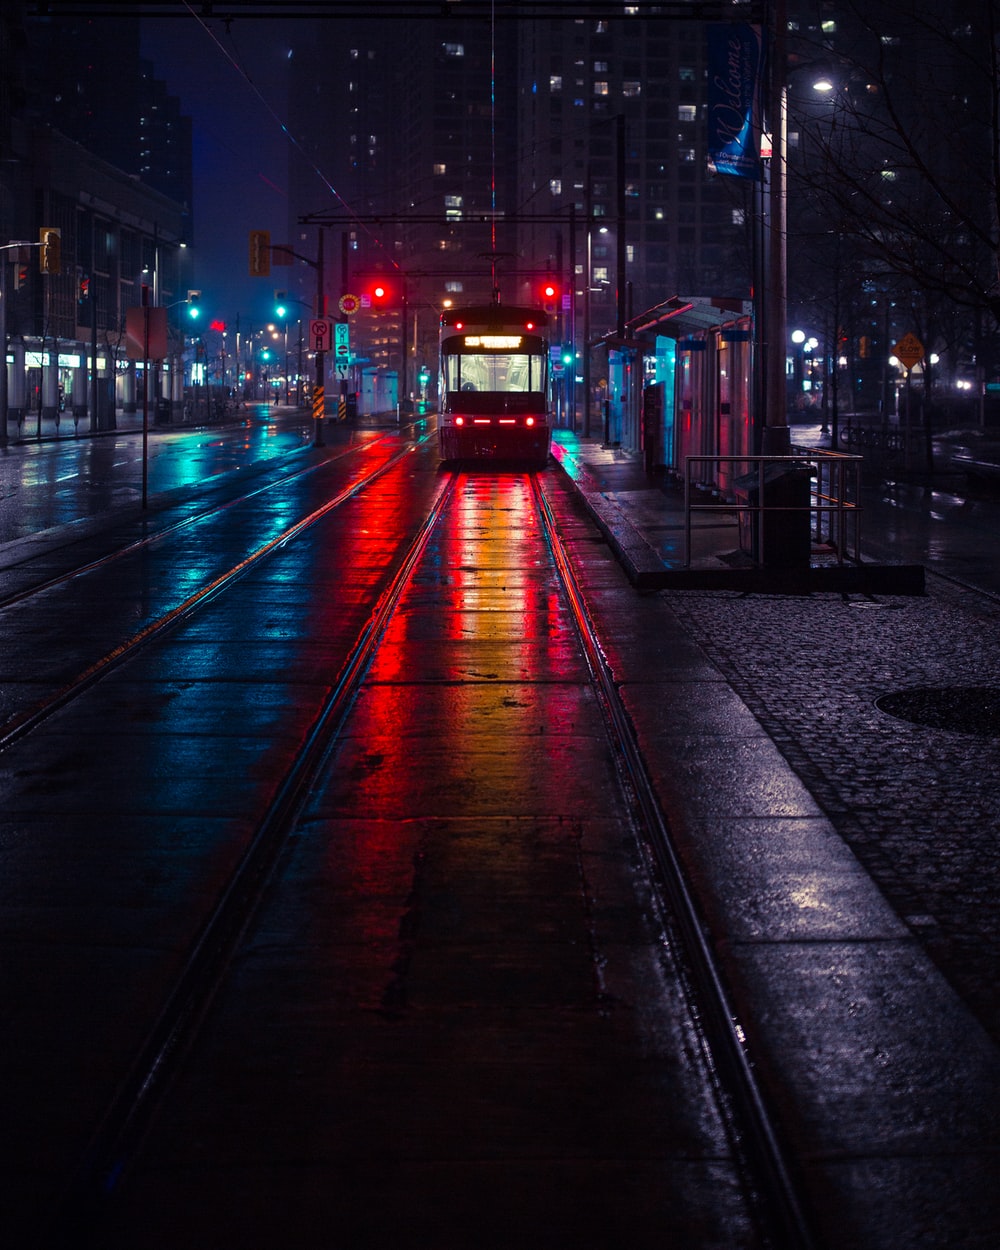 City Streets At Night Picture. Download Free Image